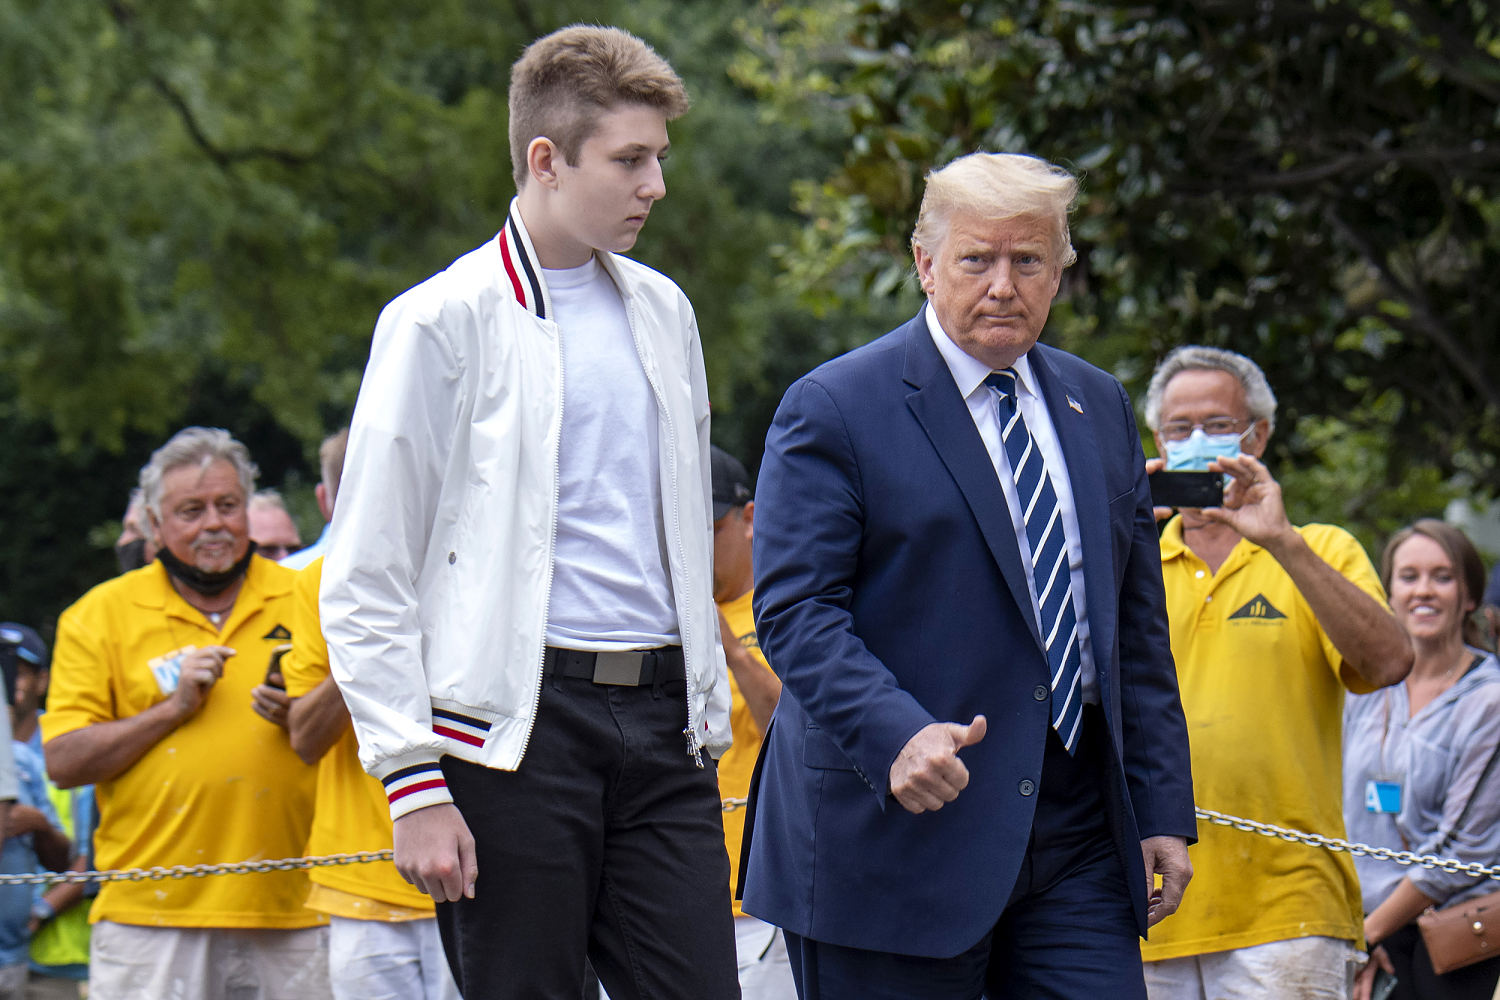 Trump gets his son Barron's age wrong in TV interview